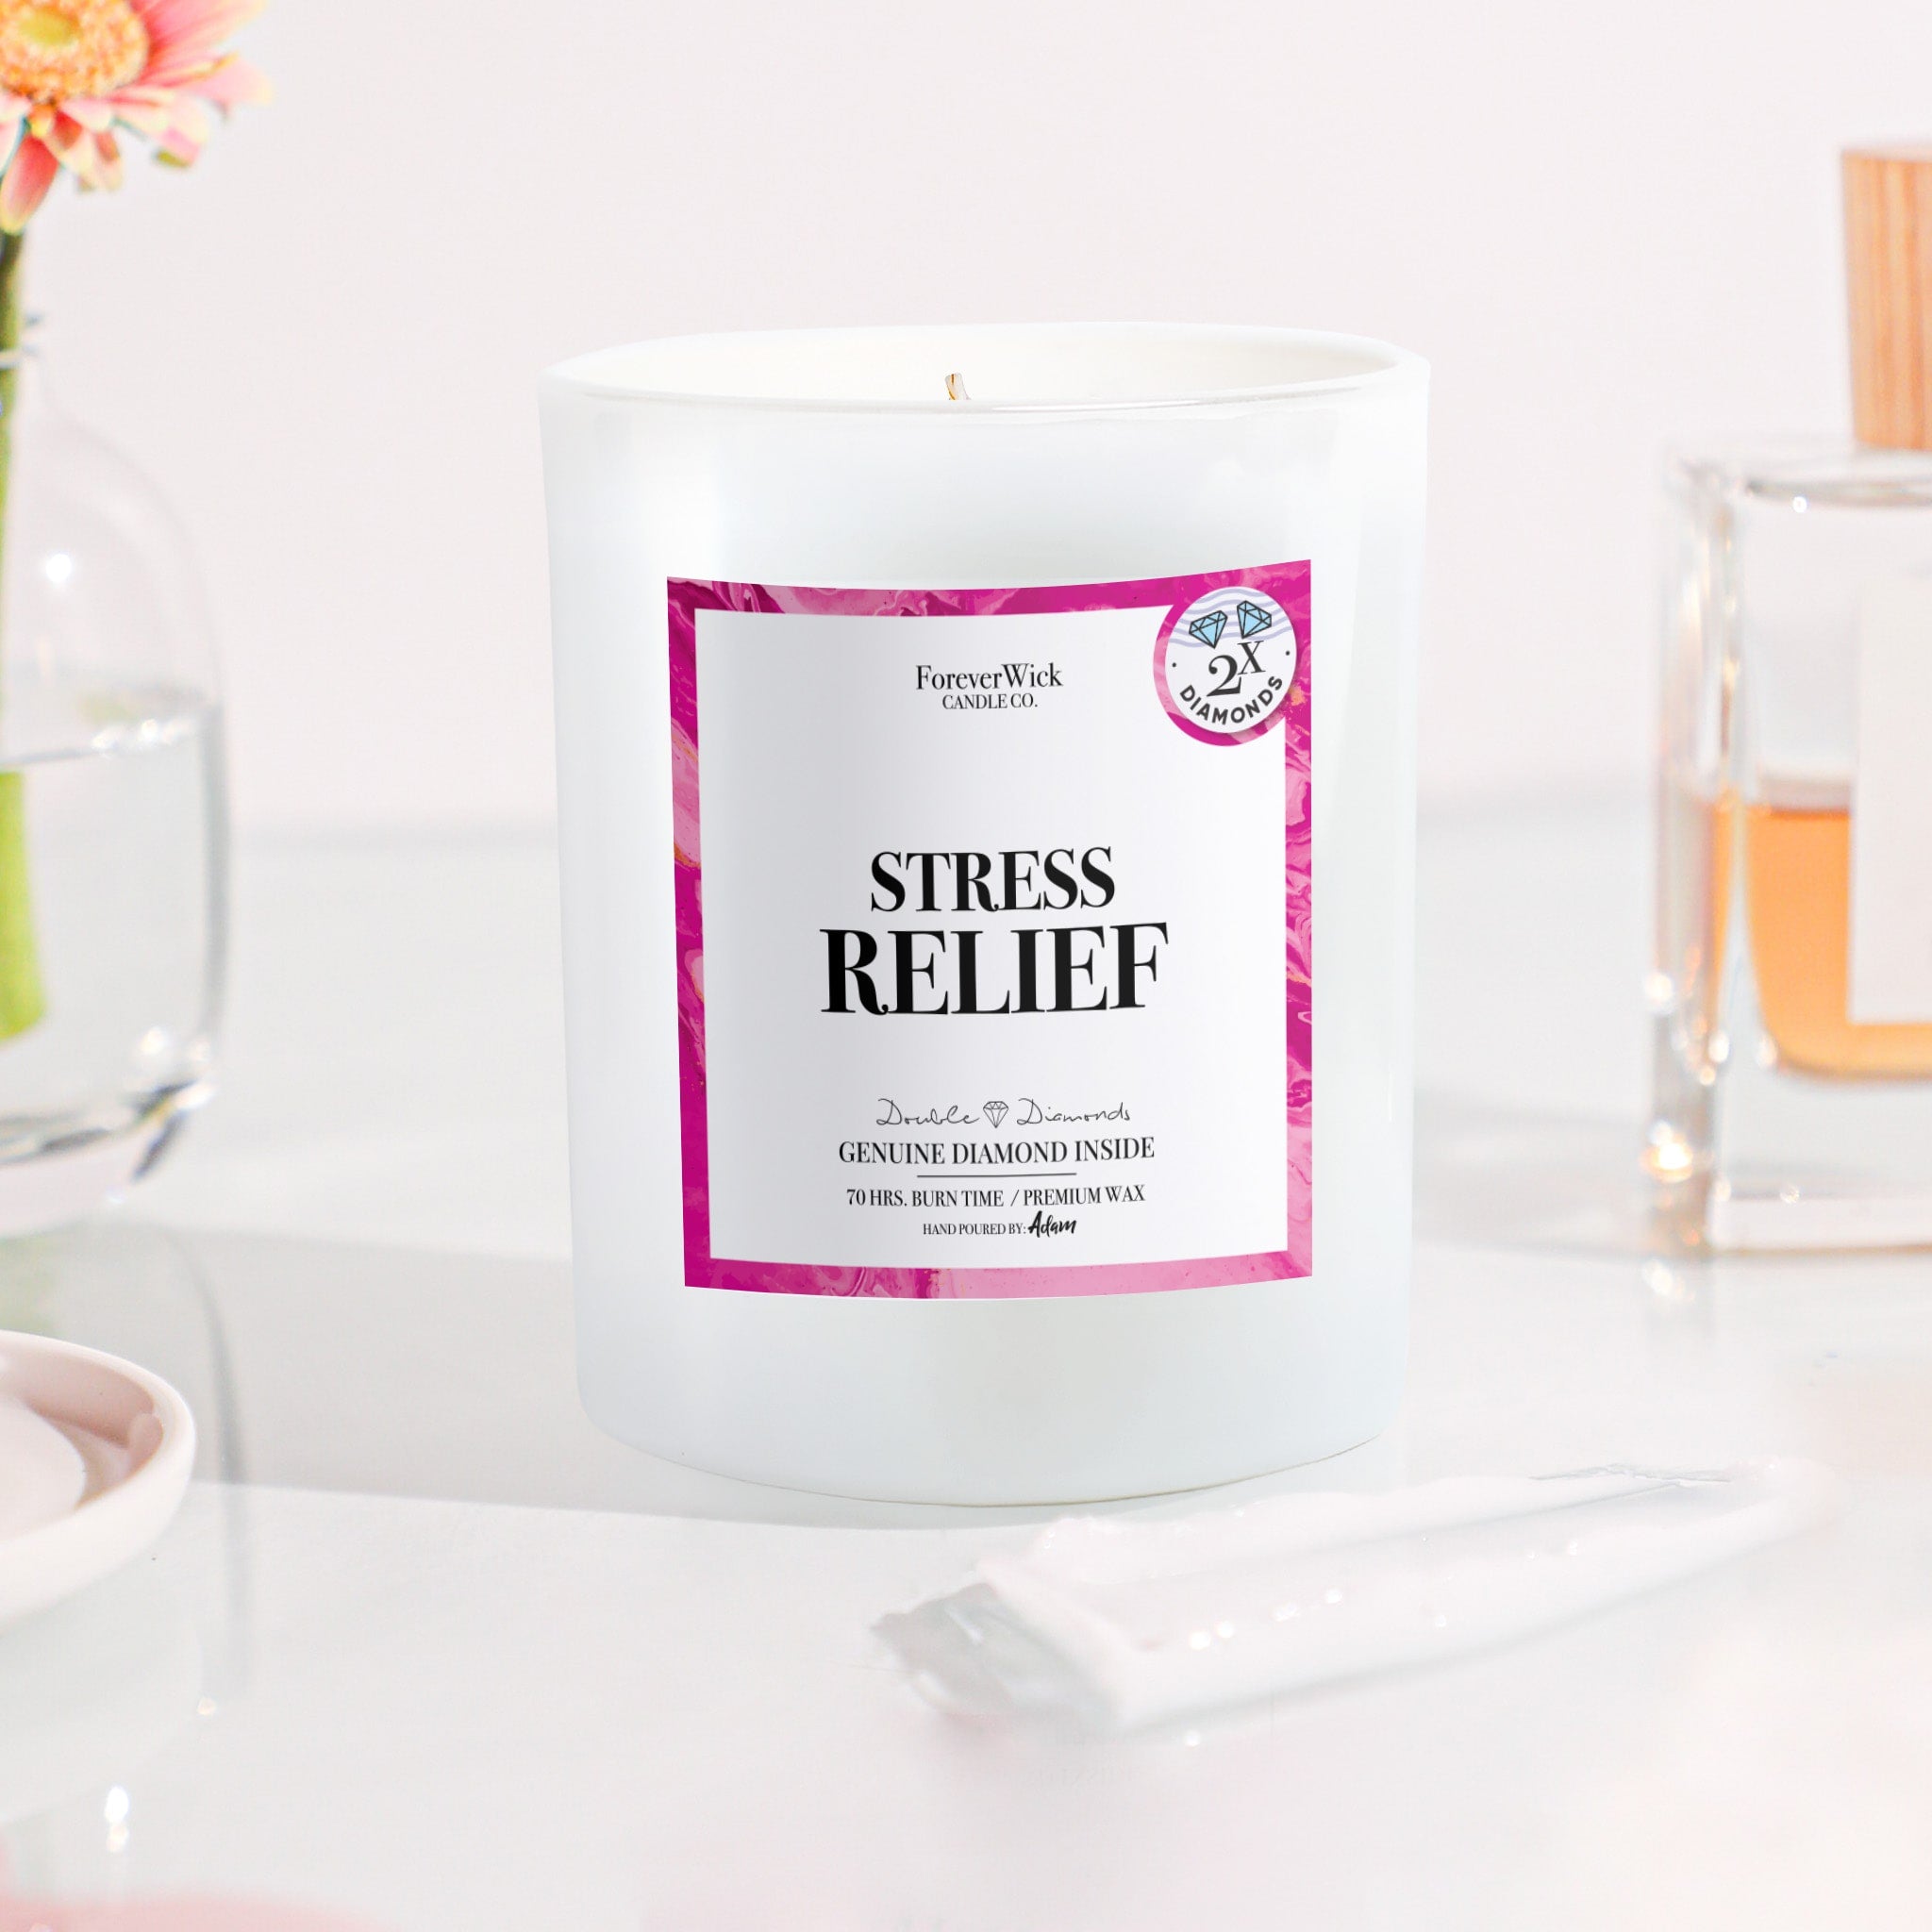 Stress Relief Double Diamond Candle